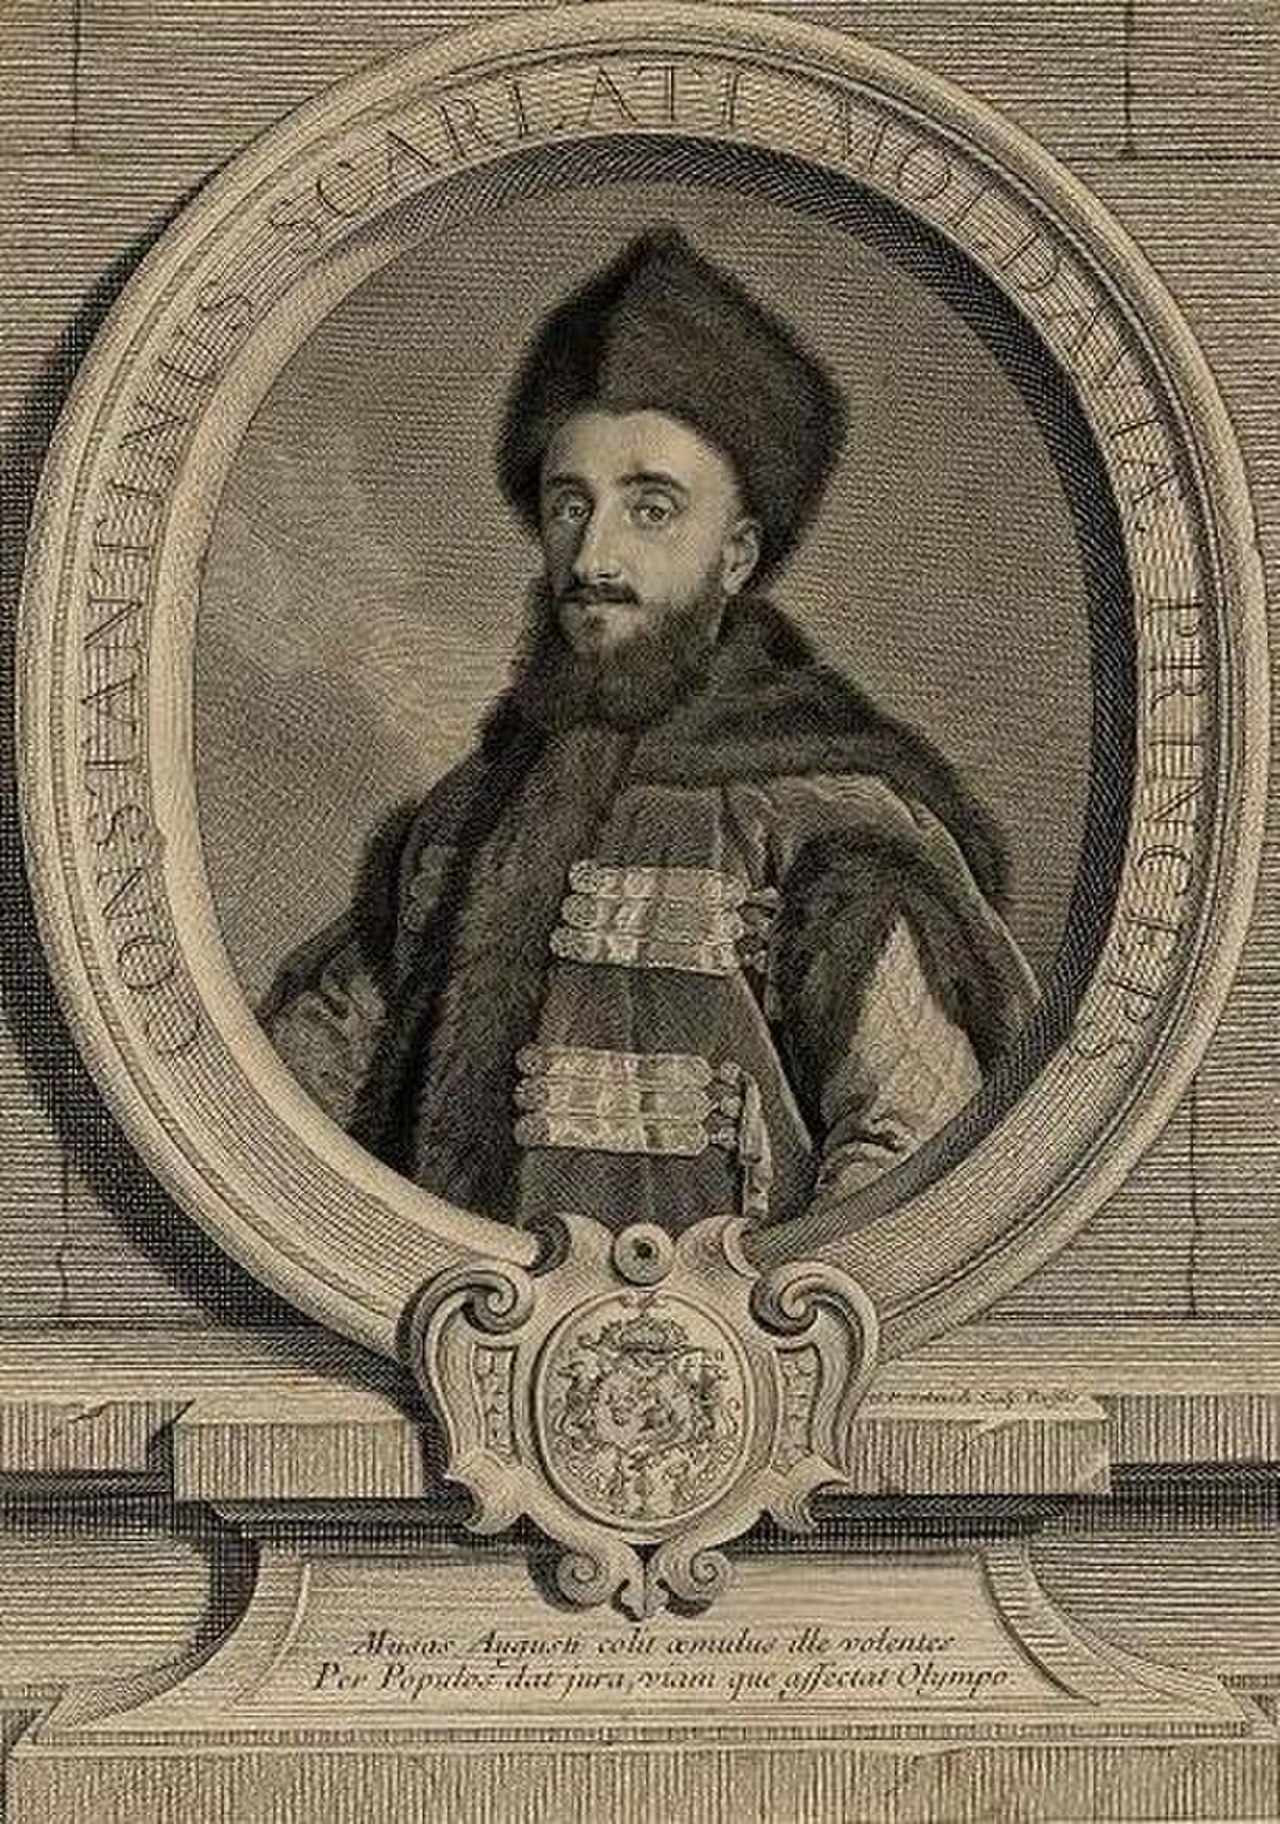 Engraving of a bearded man wearing a hat